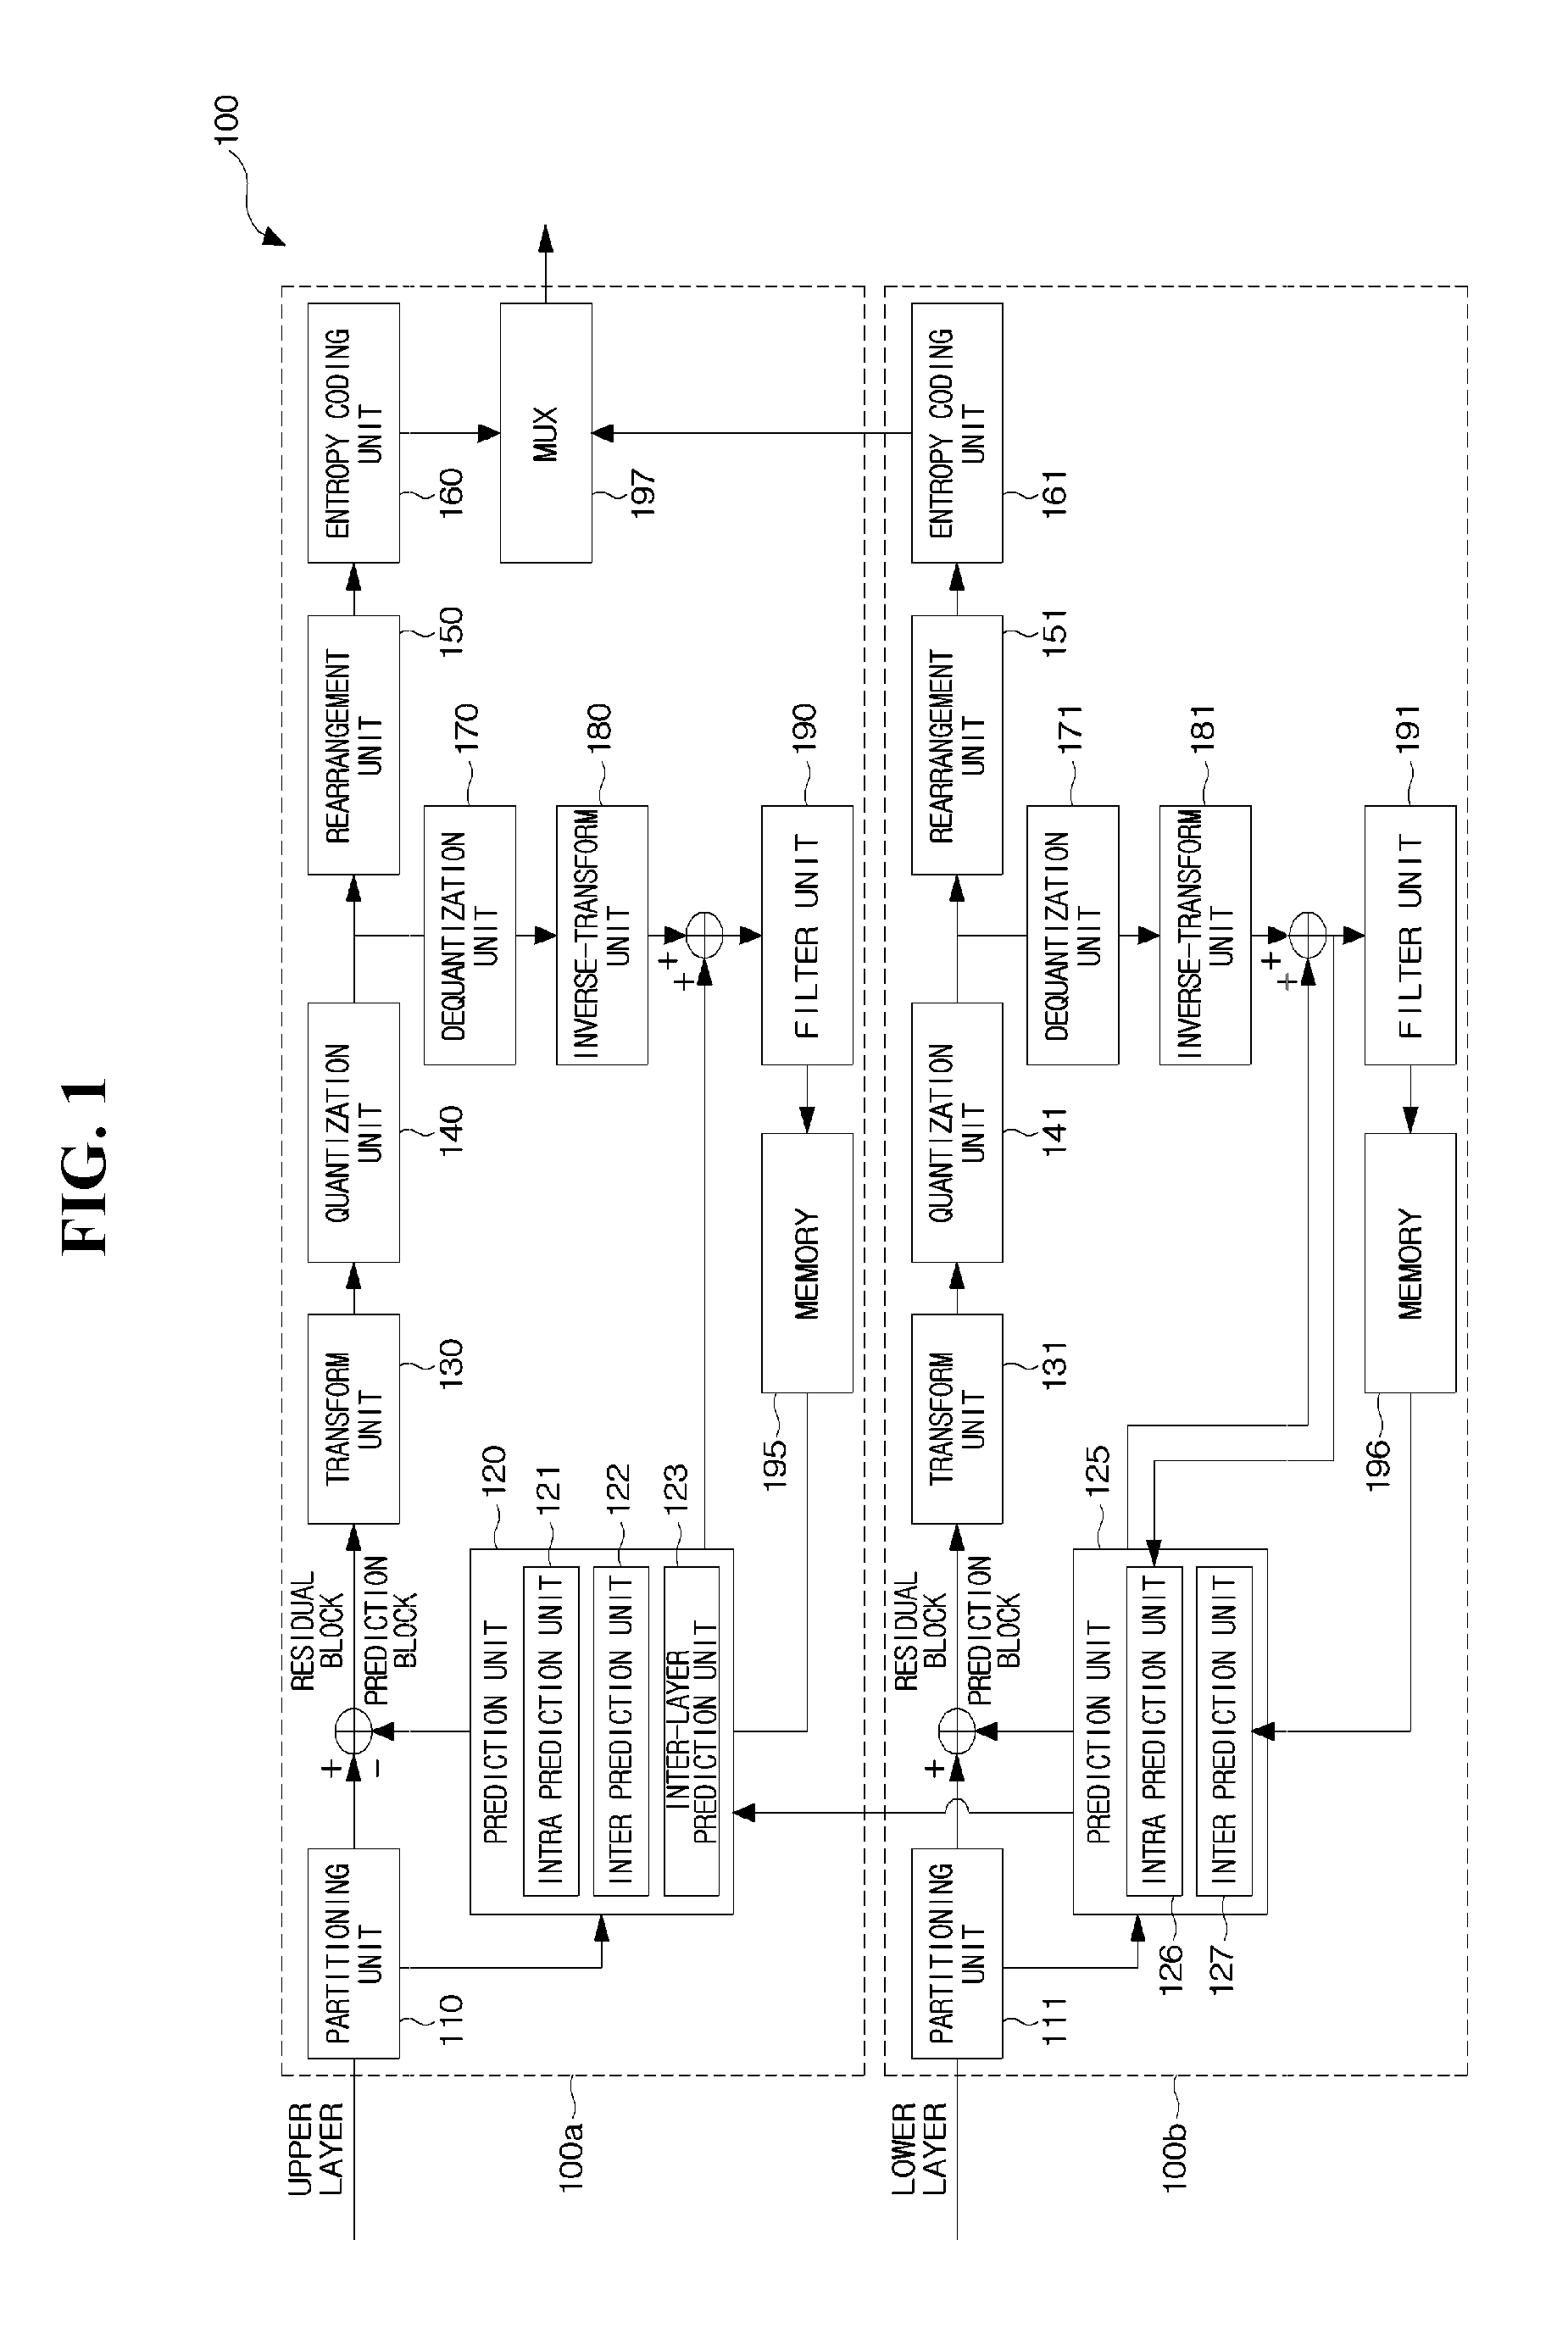 Scalable video signal encoding/decoding method and apparatus